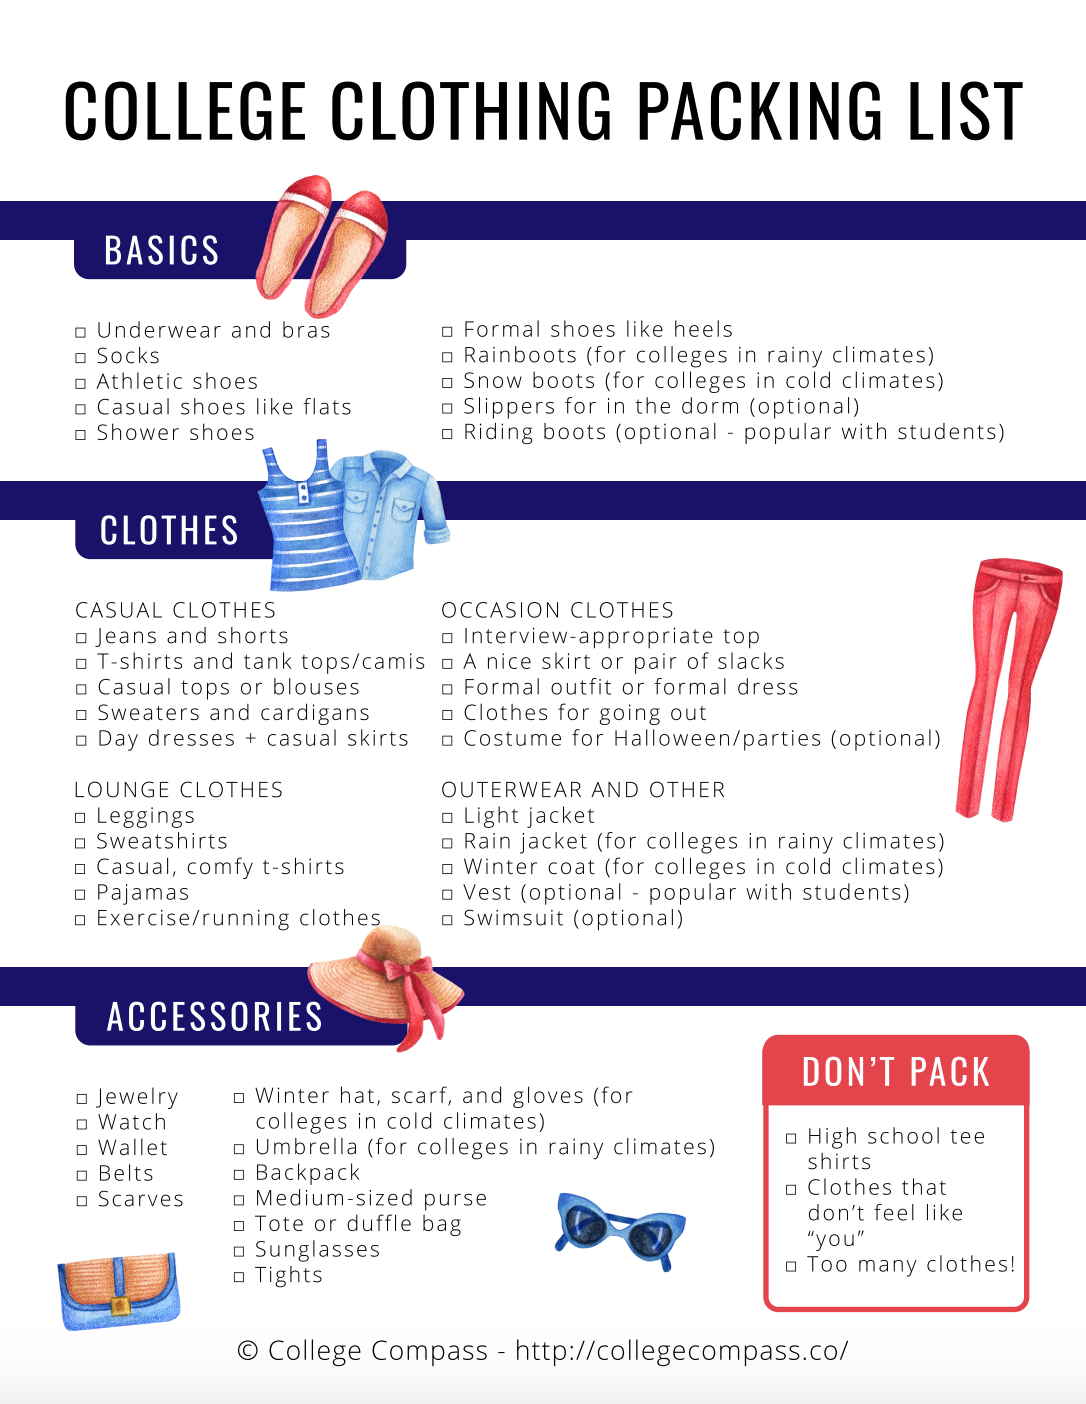 College Clothing Packing List